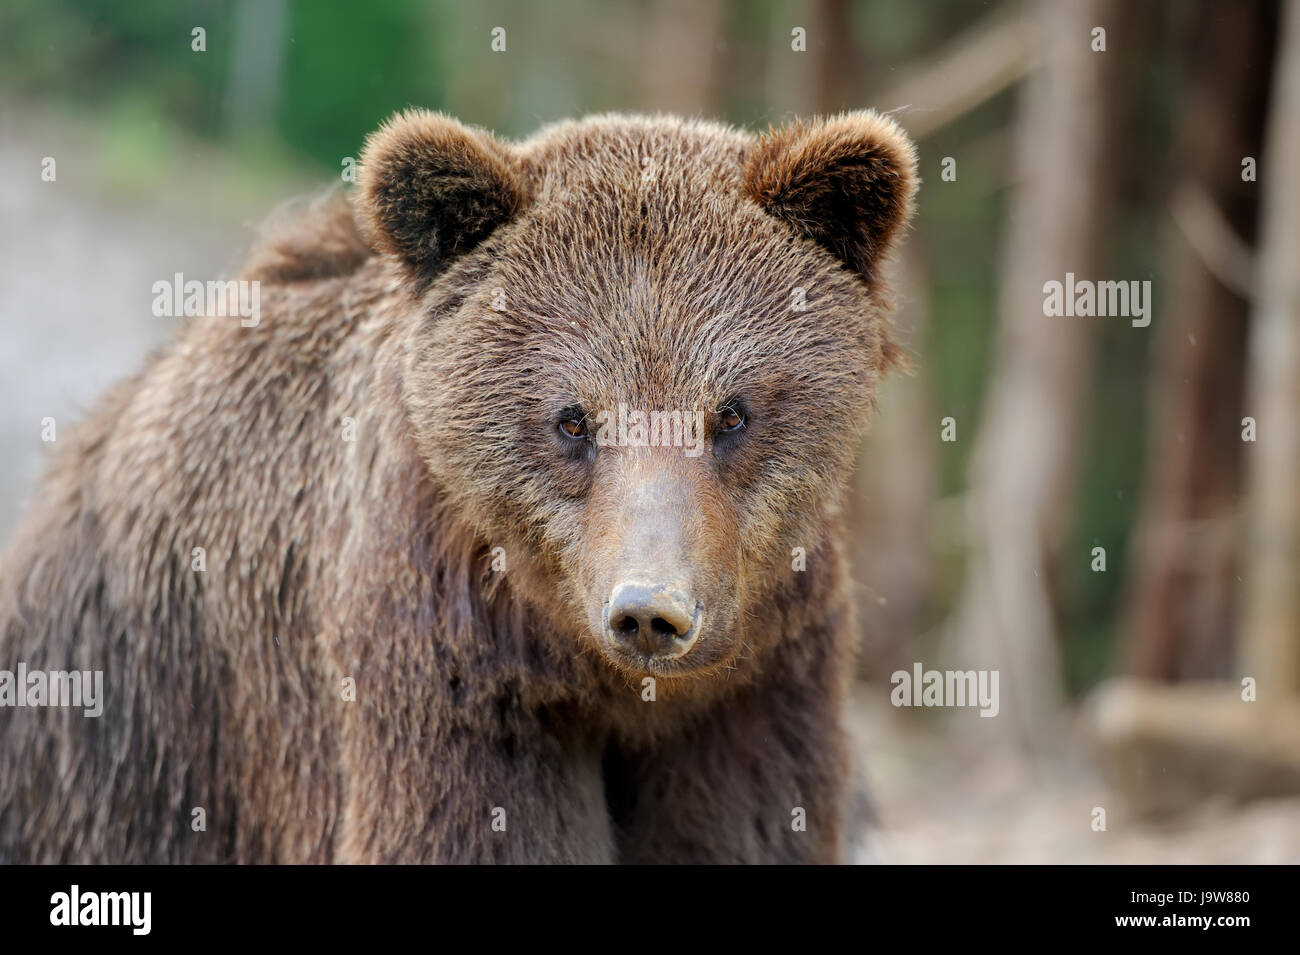 Brown bear in forest after rain Stock Photo